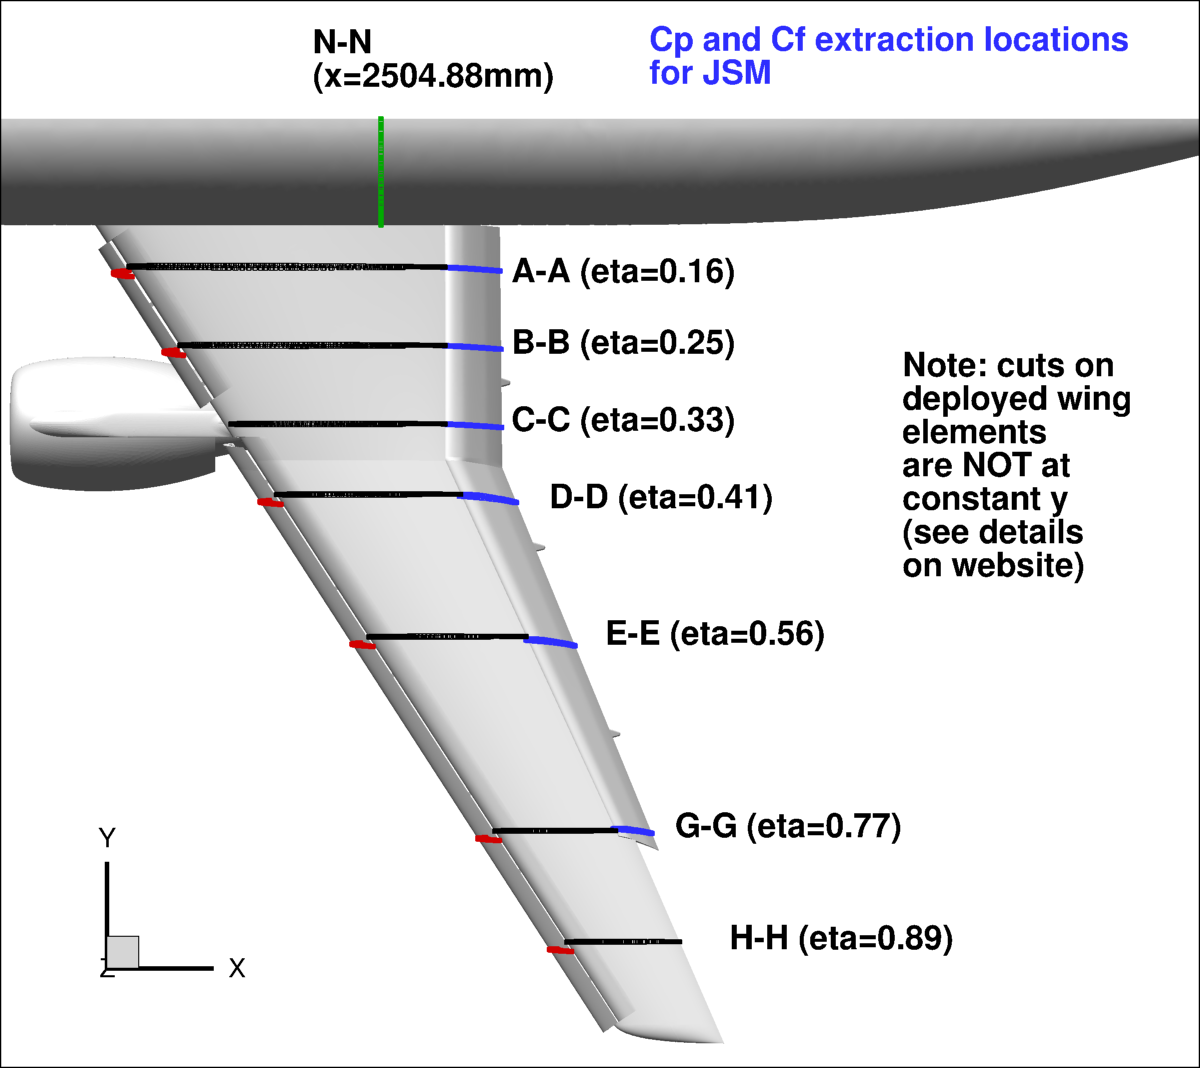 Surface extraction locations for JSM